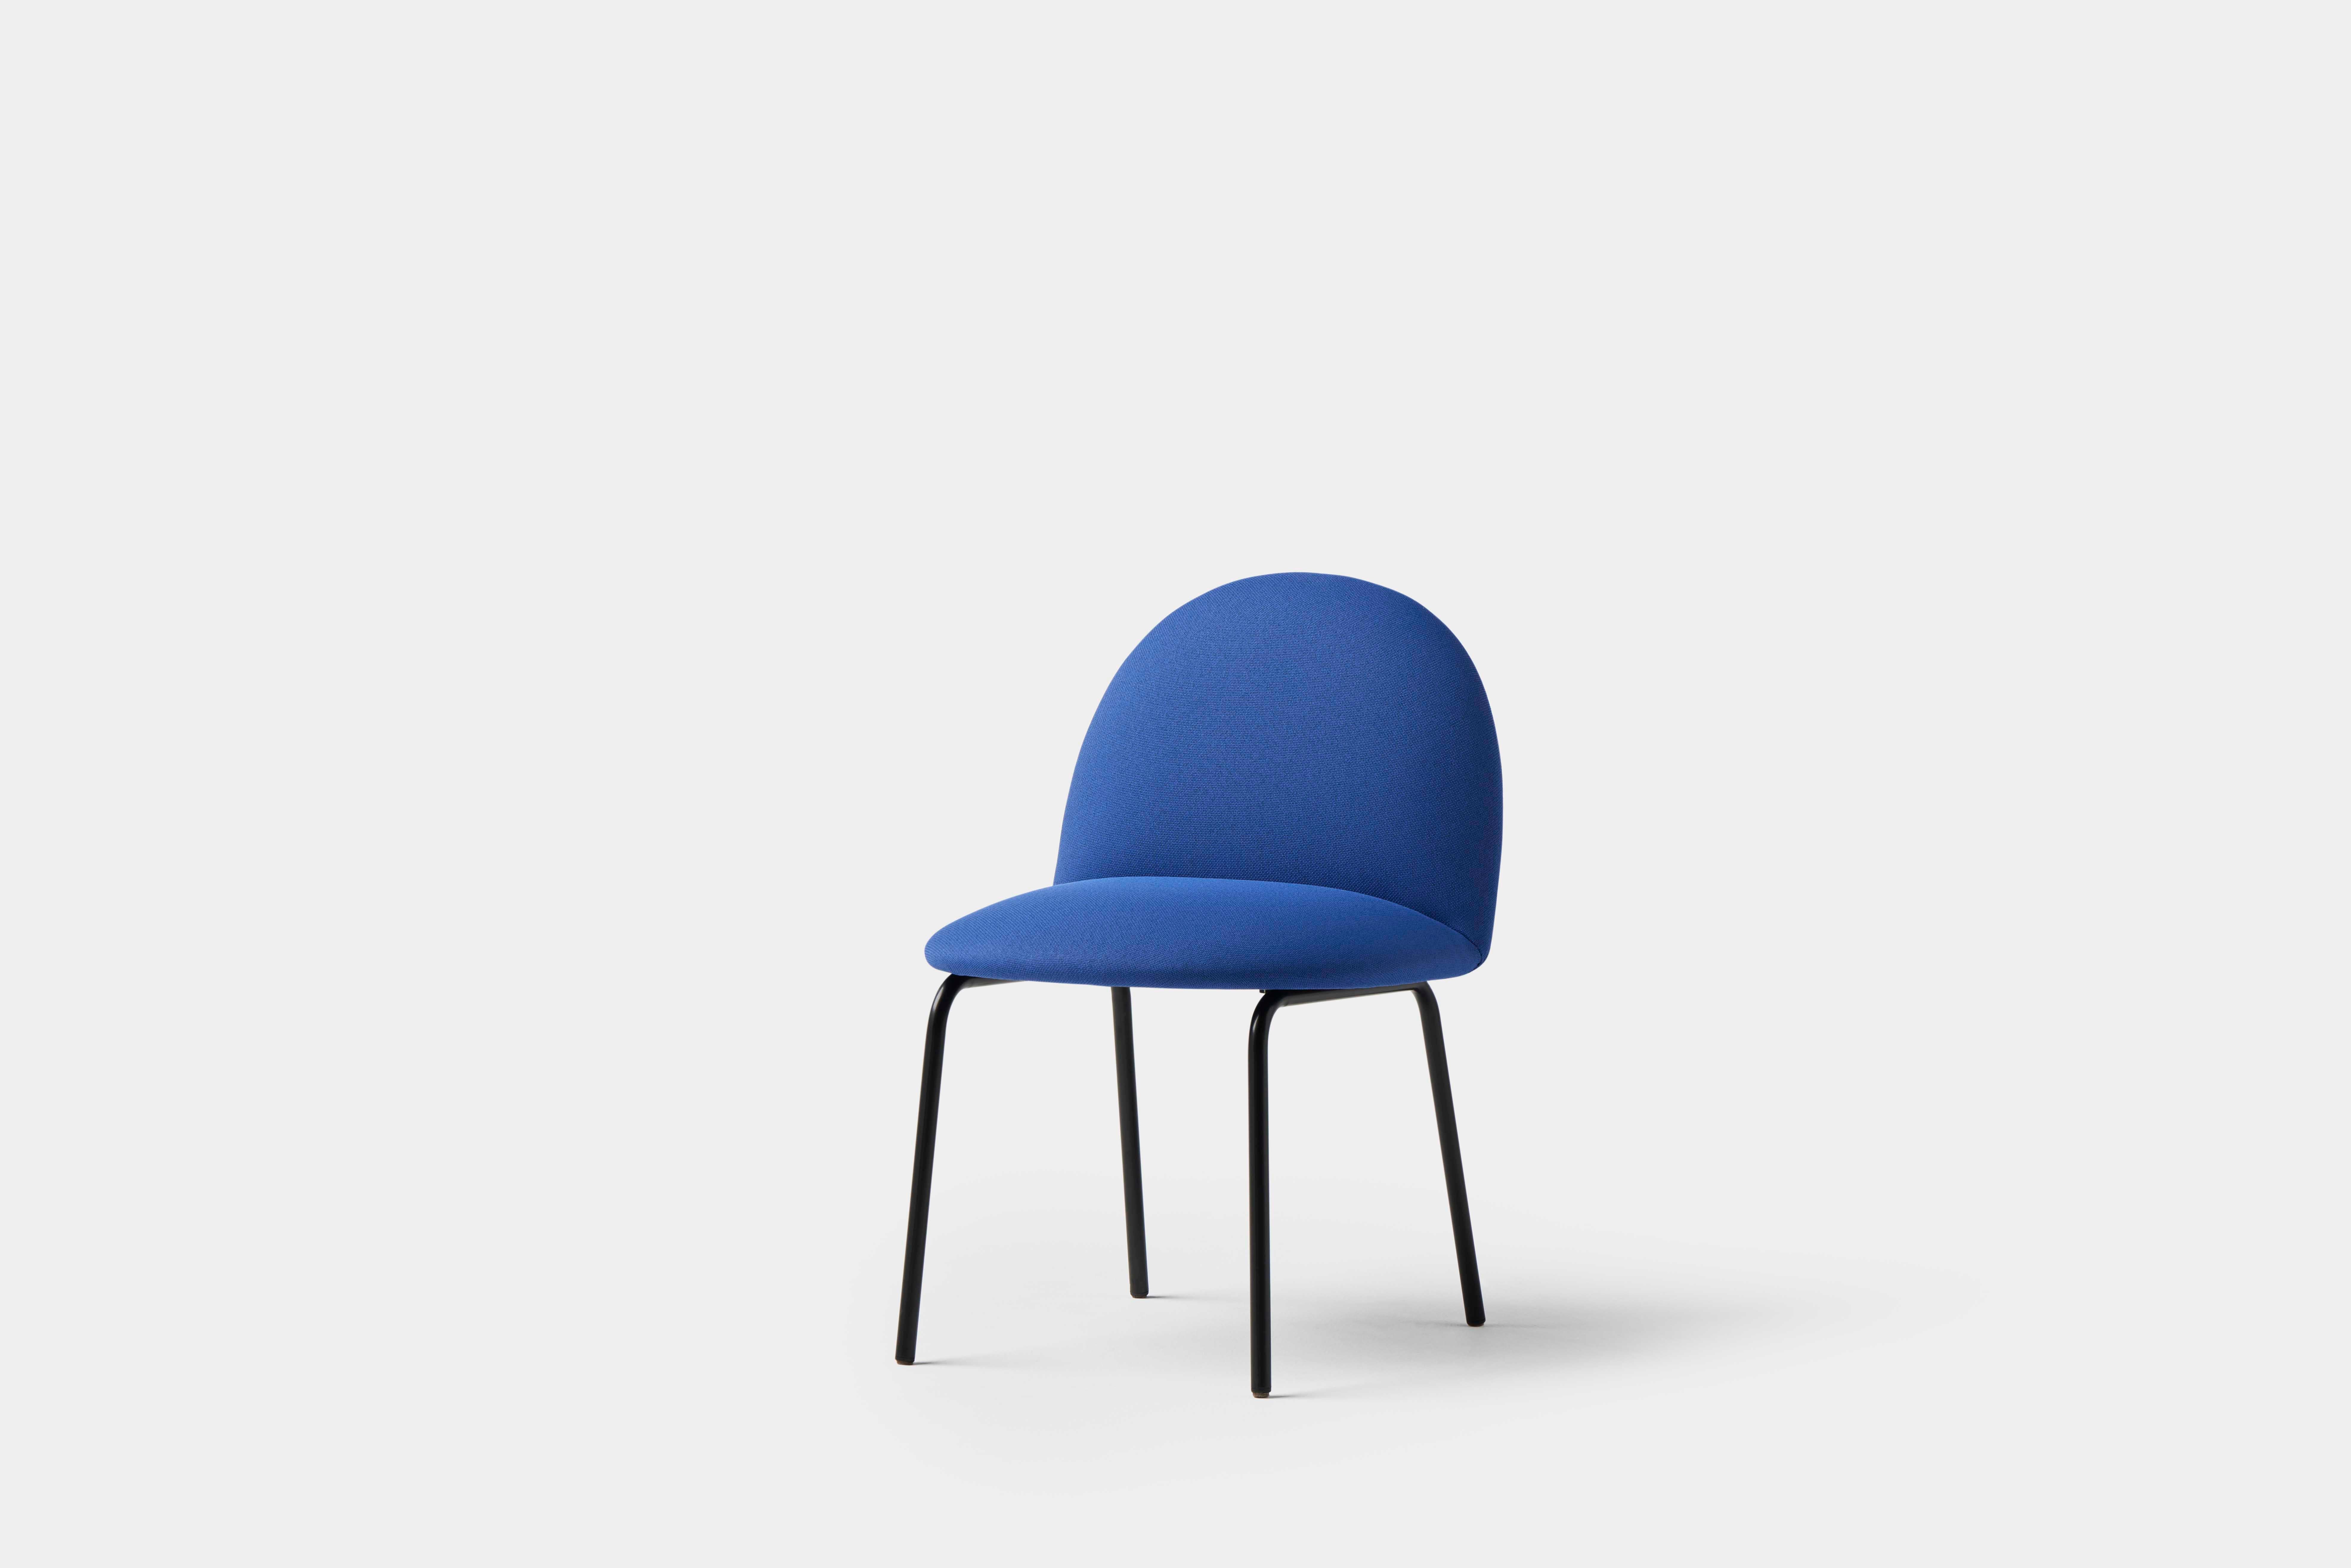 Terra chair by Pepe Albargues
Dimensions: W 53 x D 60 x H 78 x Seat 47
Materials: Black painted iron frame and legs for others colours please ask for increment. Foam CMHR (high resilience and flame retardant) for all our cushion filling systems.